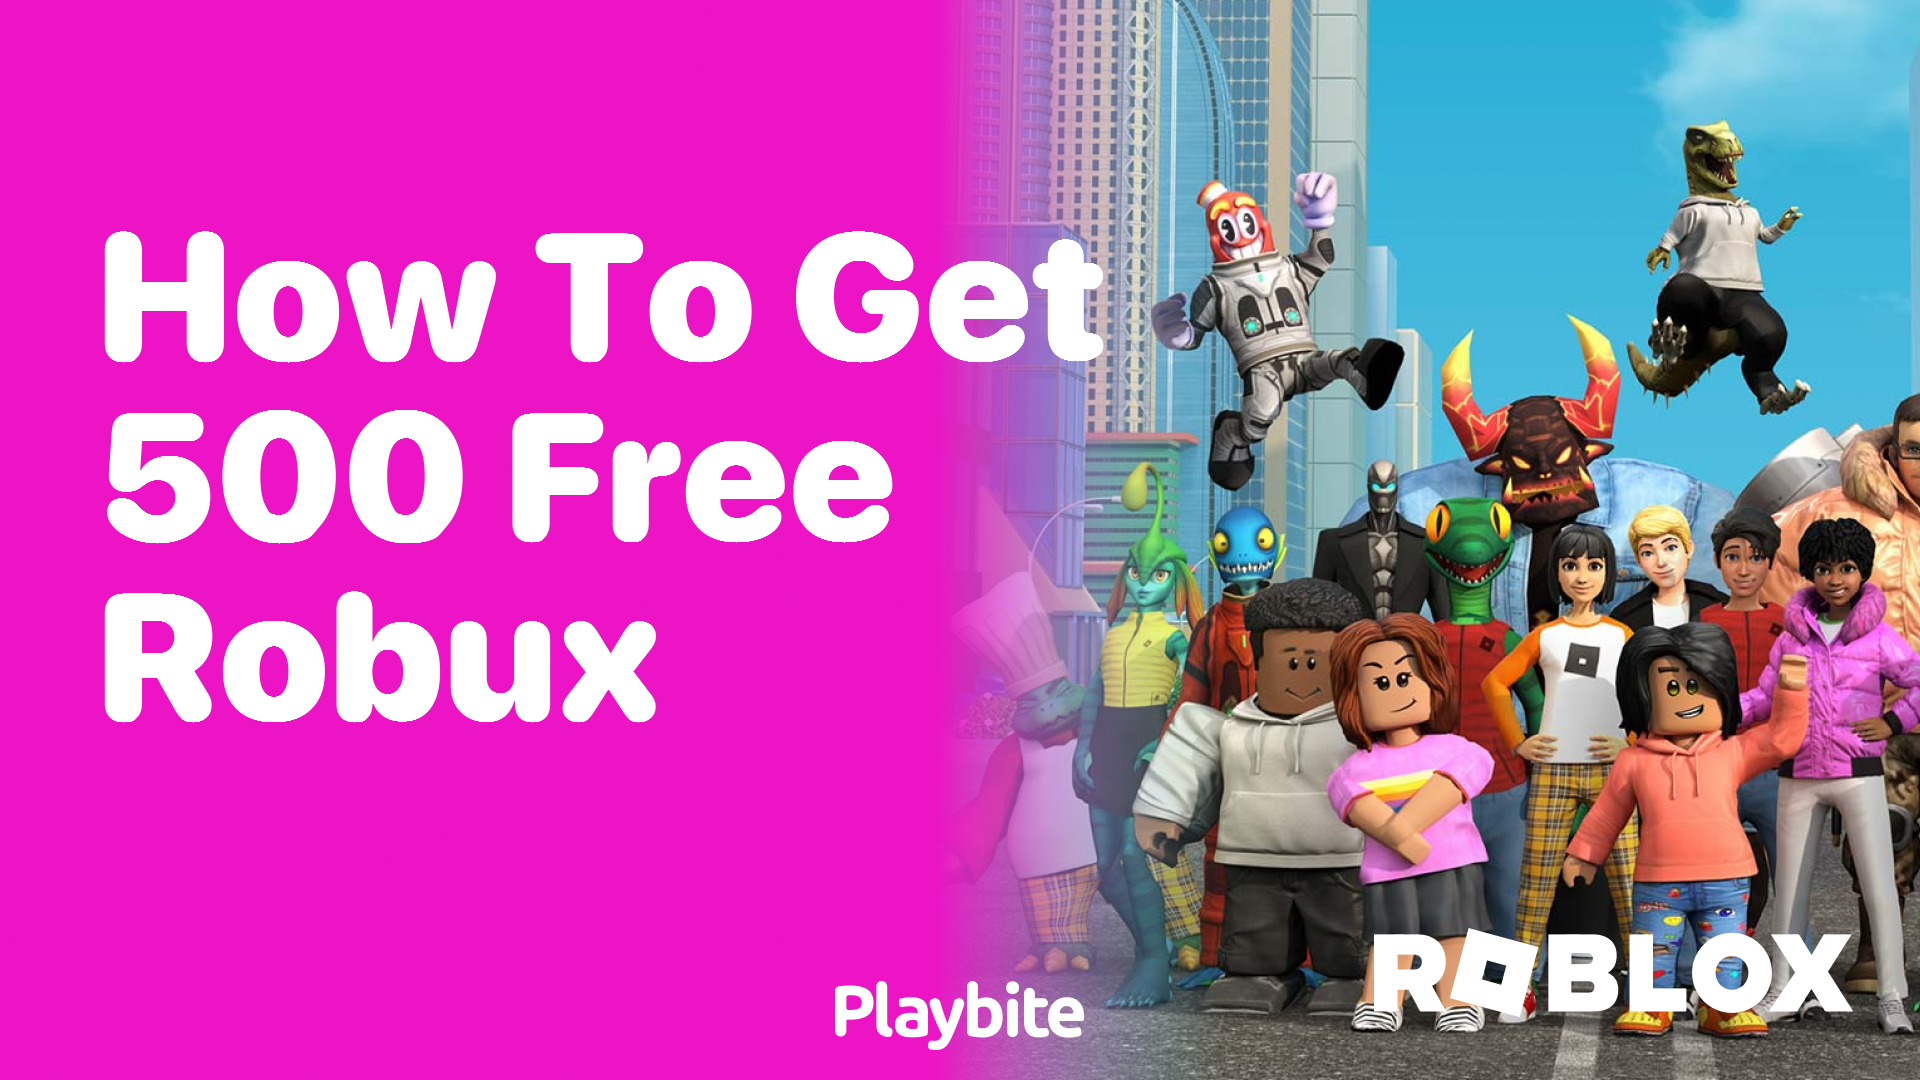 How to Get 500 Free Robux: Tips and Tricks